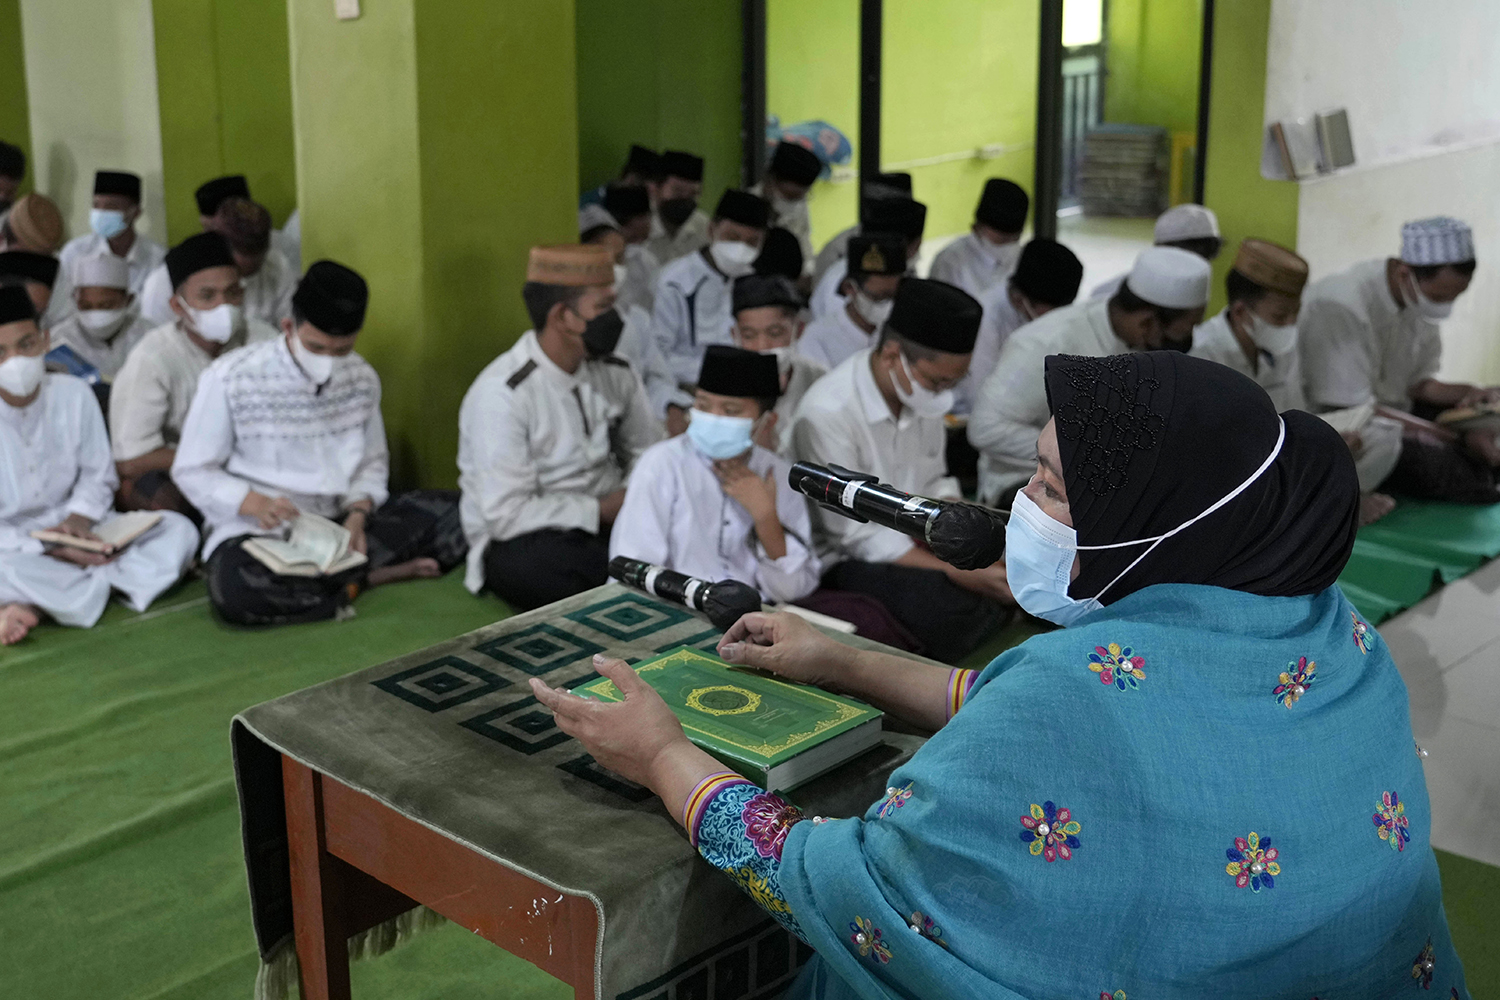 Maria Ulfah, right, sits in front of a class where she teaches Quran recitation at Baitul Qurro Islamic Boarding School in Jakarta, Indonesia, Friday, Feb. 4, 2022. While the most skilled female reciters may attain celebrity-like status in some countries, others are largely confined to private spaces or all-women audiences. (AP Photo/Tatan Syuflana)